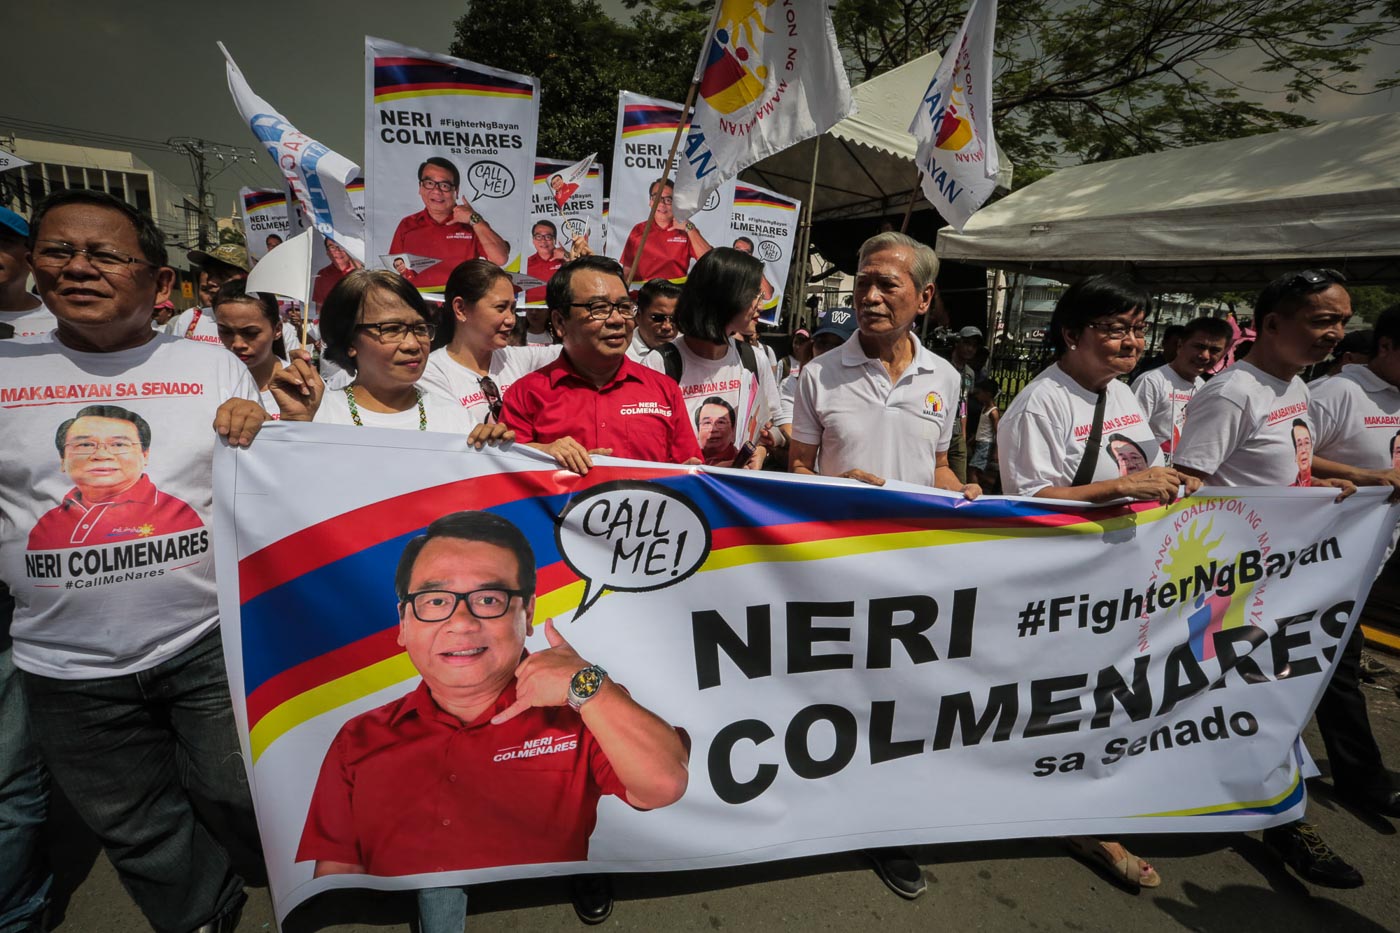 SENATE RACE. Supporters of Neri Colminares (in red shirt) gather outside the Comelec office in Manila during the filing of Certificates of Candidacy on October 11, 2018. Photo by Jire Carreon/Rappler 